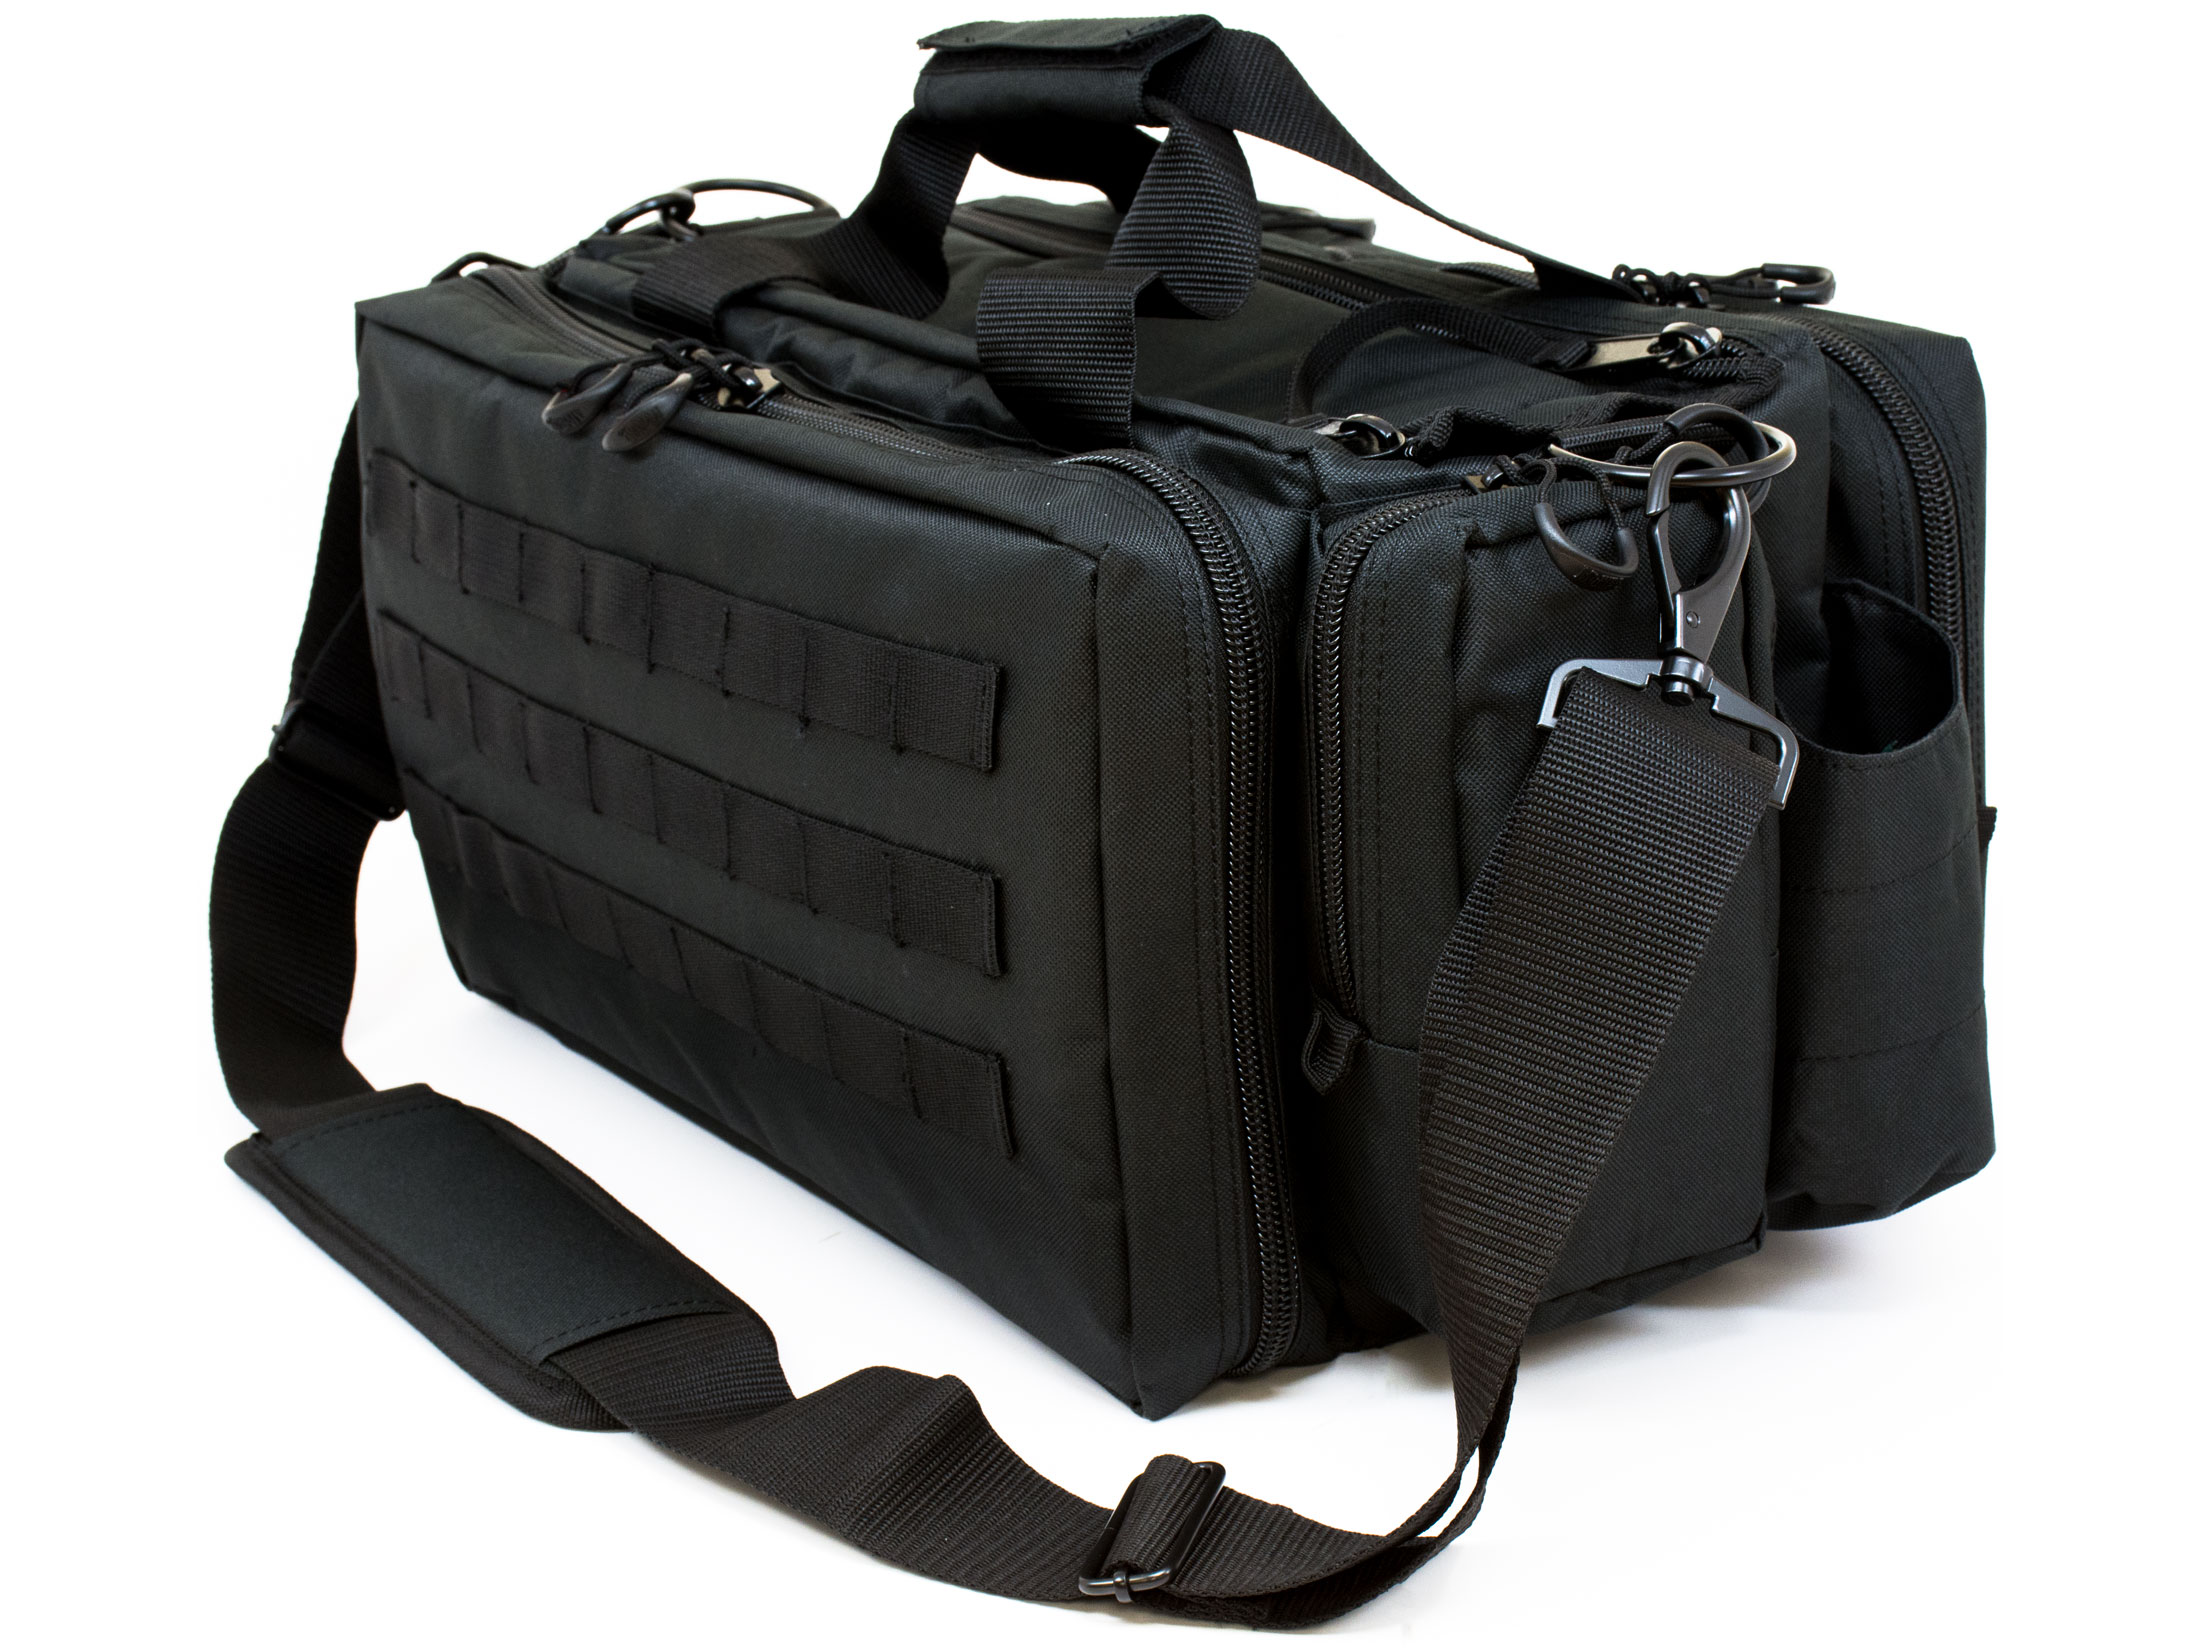 MidwayUSA AR-15 Tactical Range Bag For Sale | Firearms Site